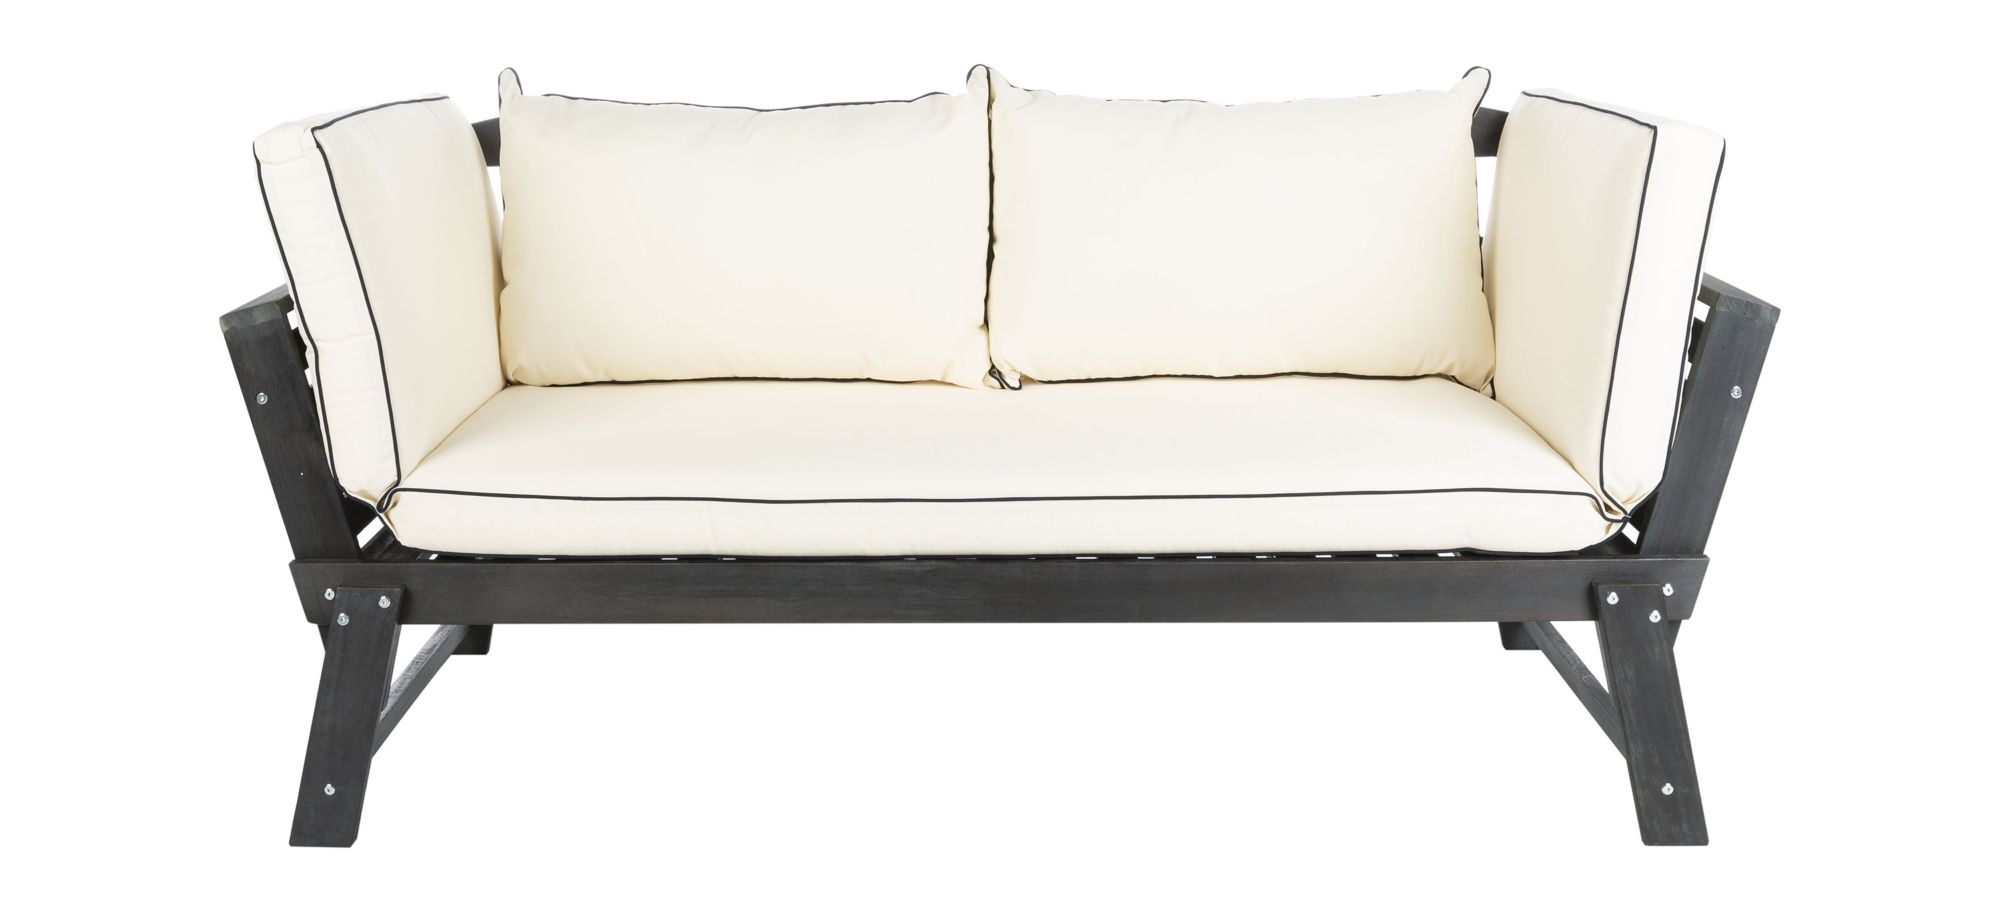 Vesta Modern Contemporary Daybed in Ash Gray / White by Safavieh